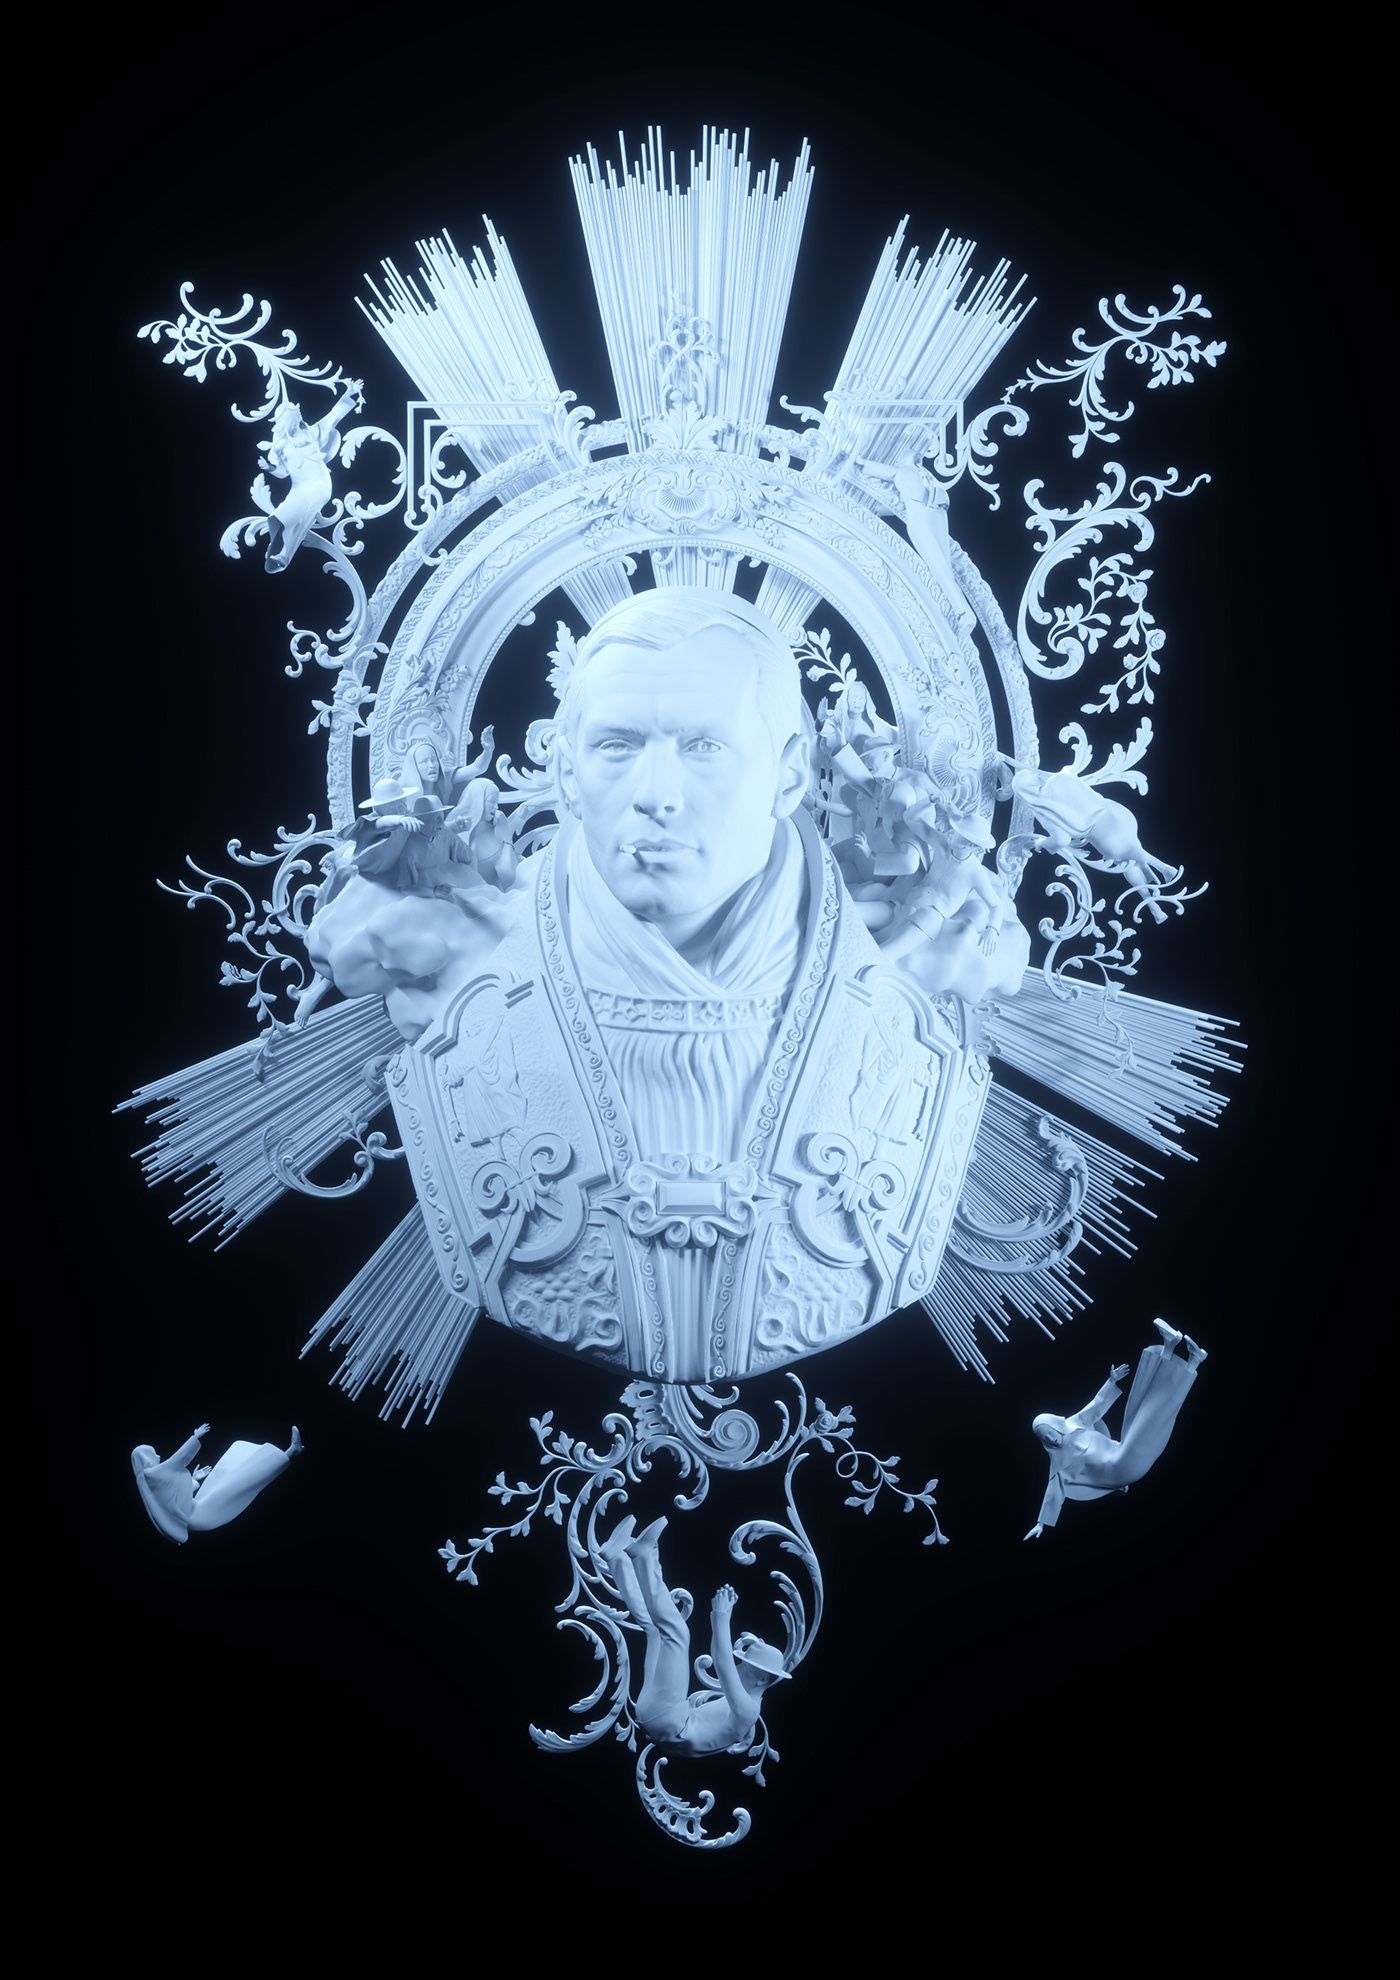 The Young Pope octane cinema 4d Pope jude law